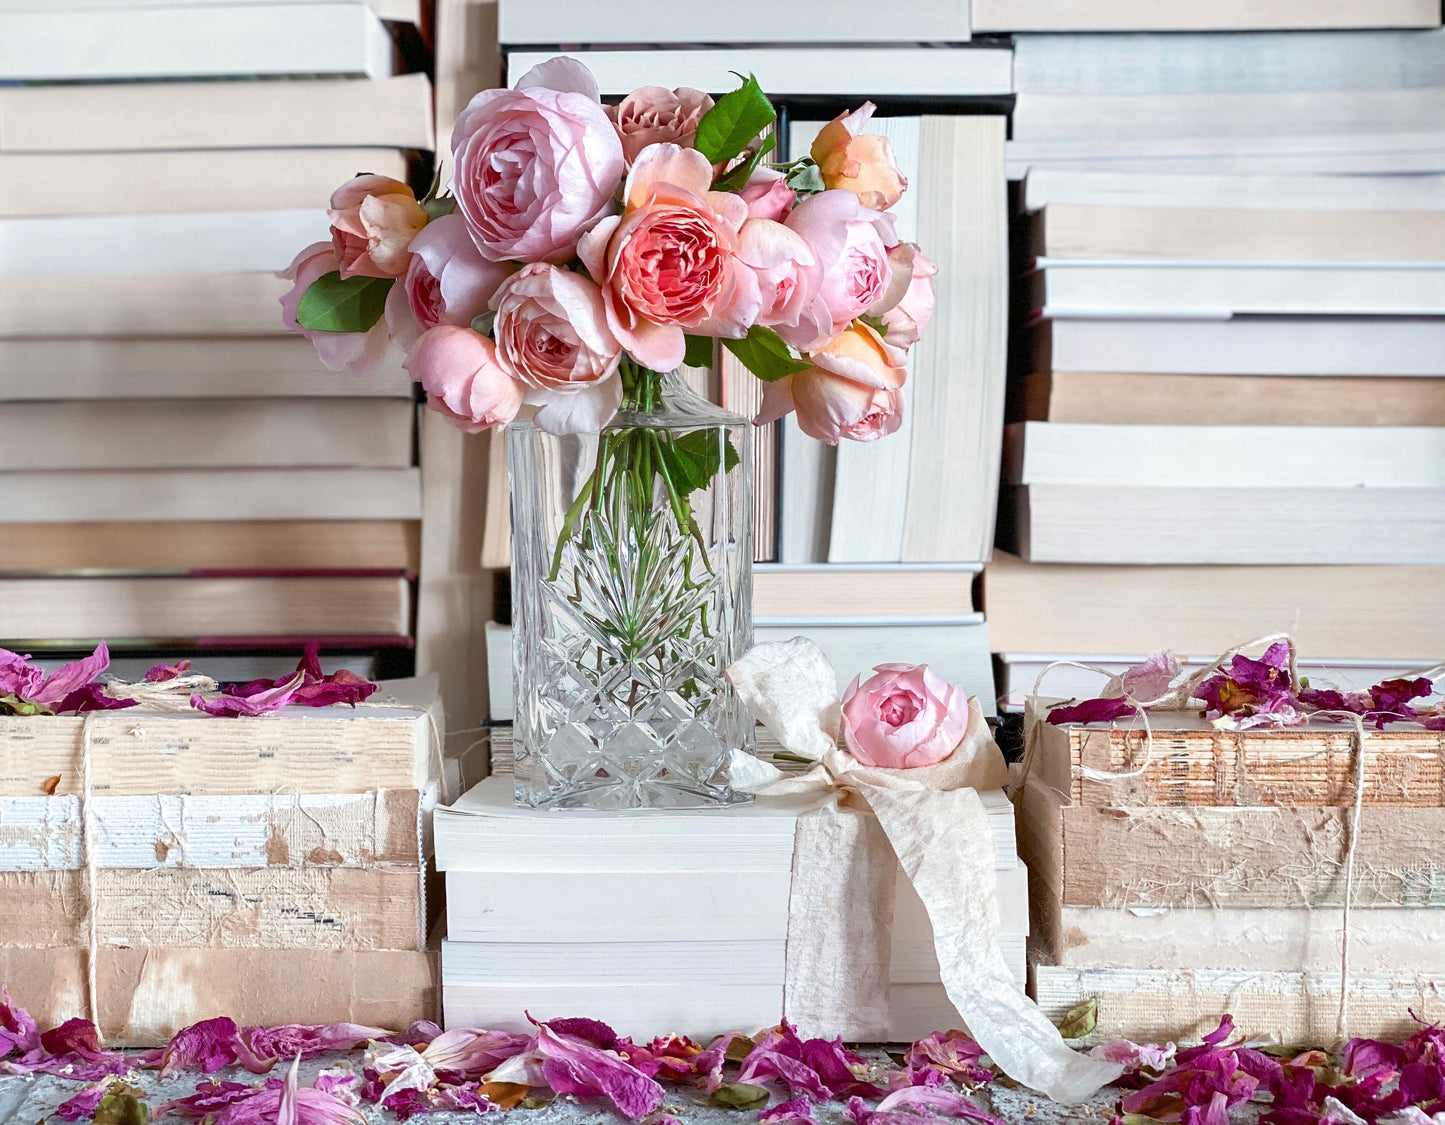 Pink Roses and Books Gallery Wrapped Canvas